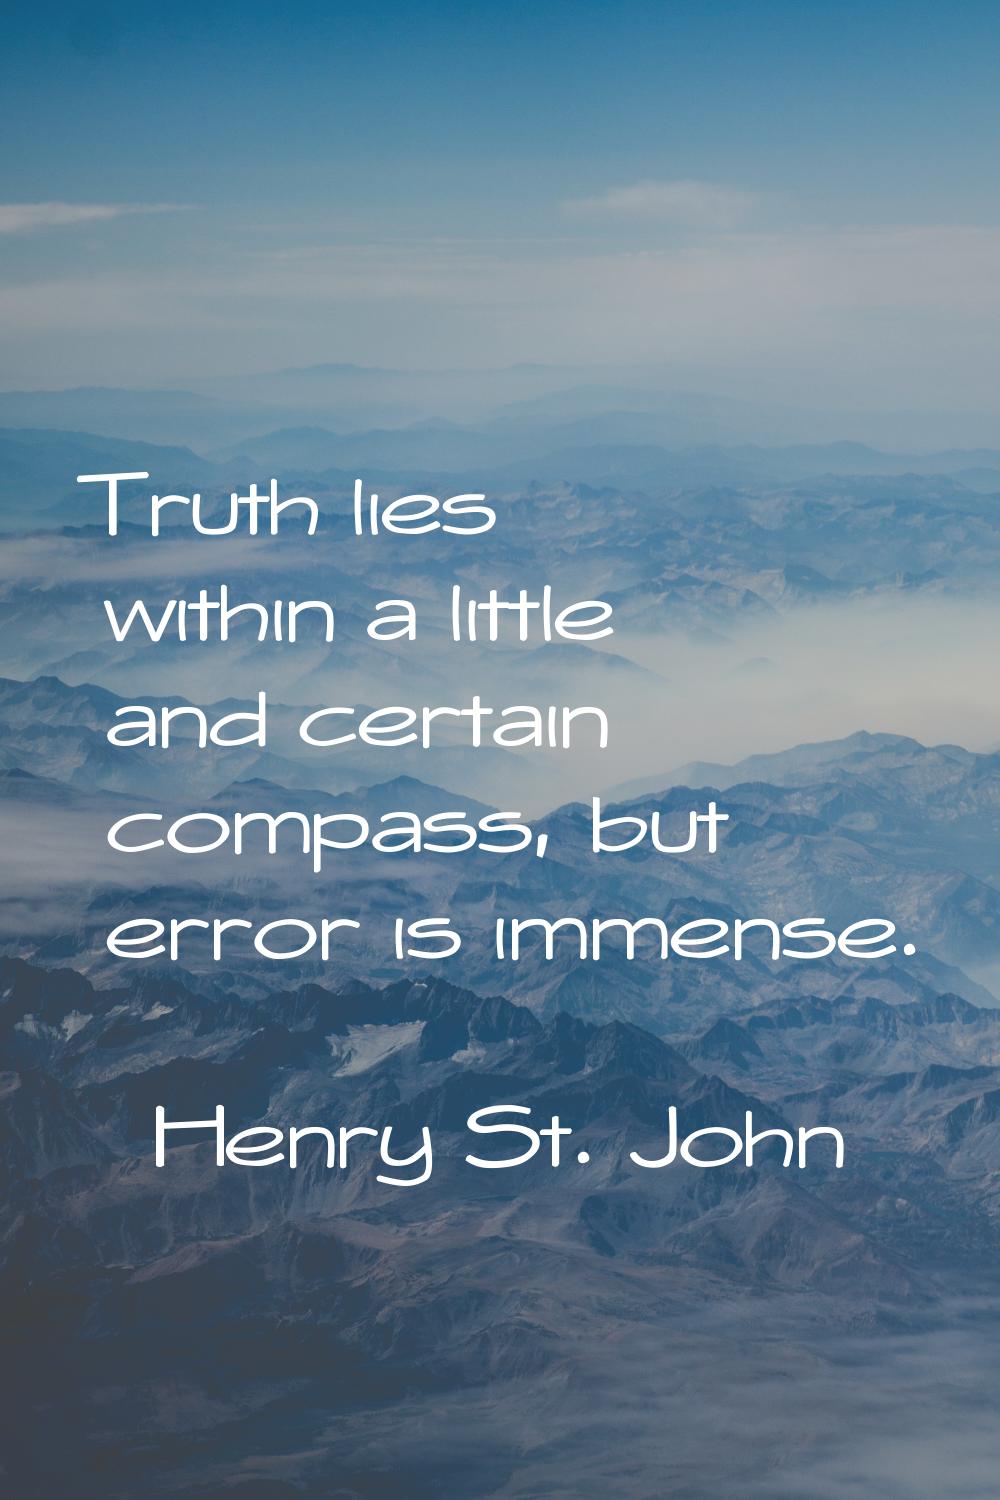 Truth lies within a little and certain compass, but error is immense.